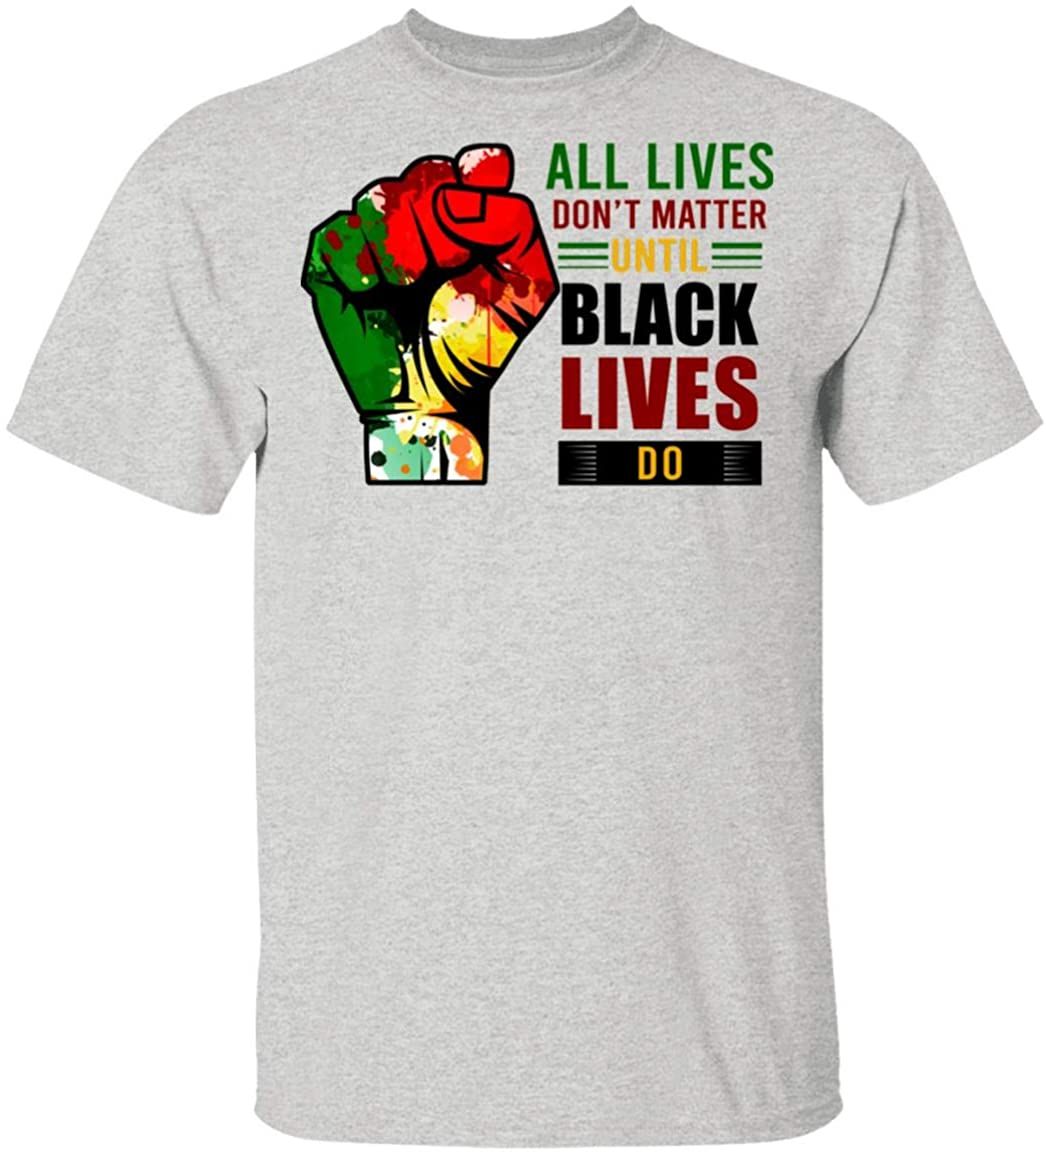 All Lives Can't Matter Until Black Lives Matter Raised Fist Equality T-Shirt Tee